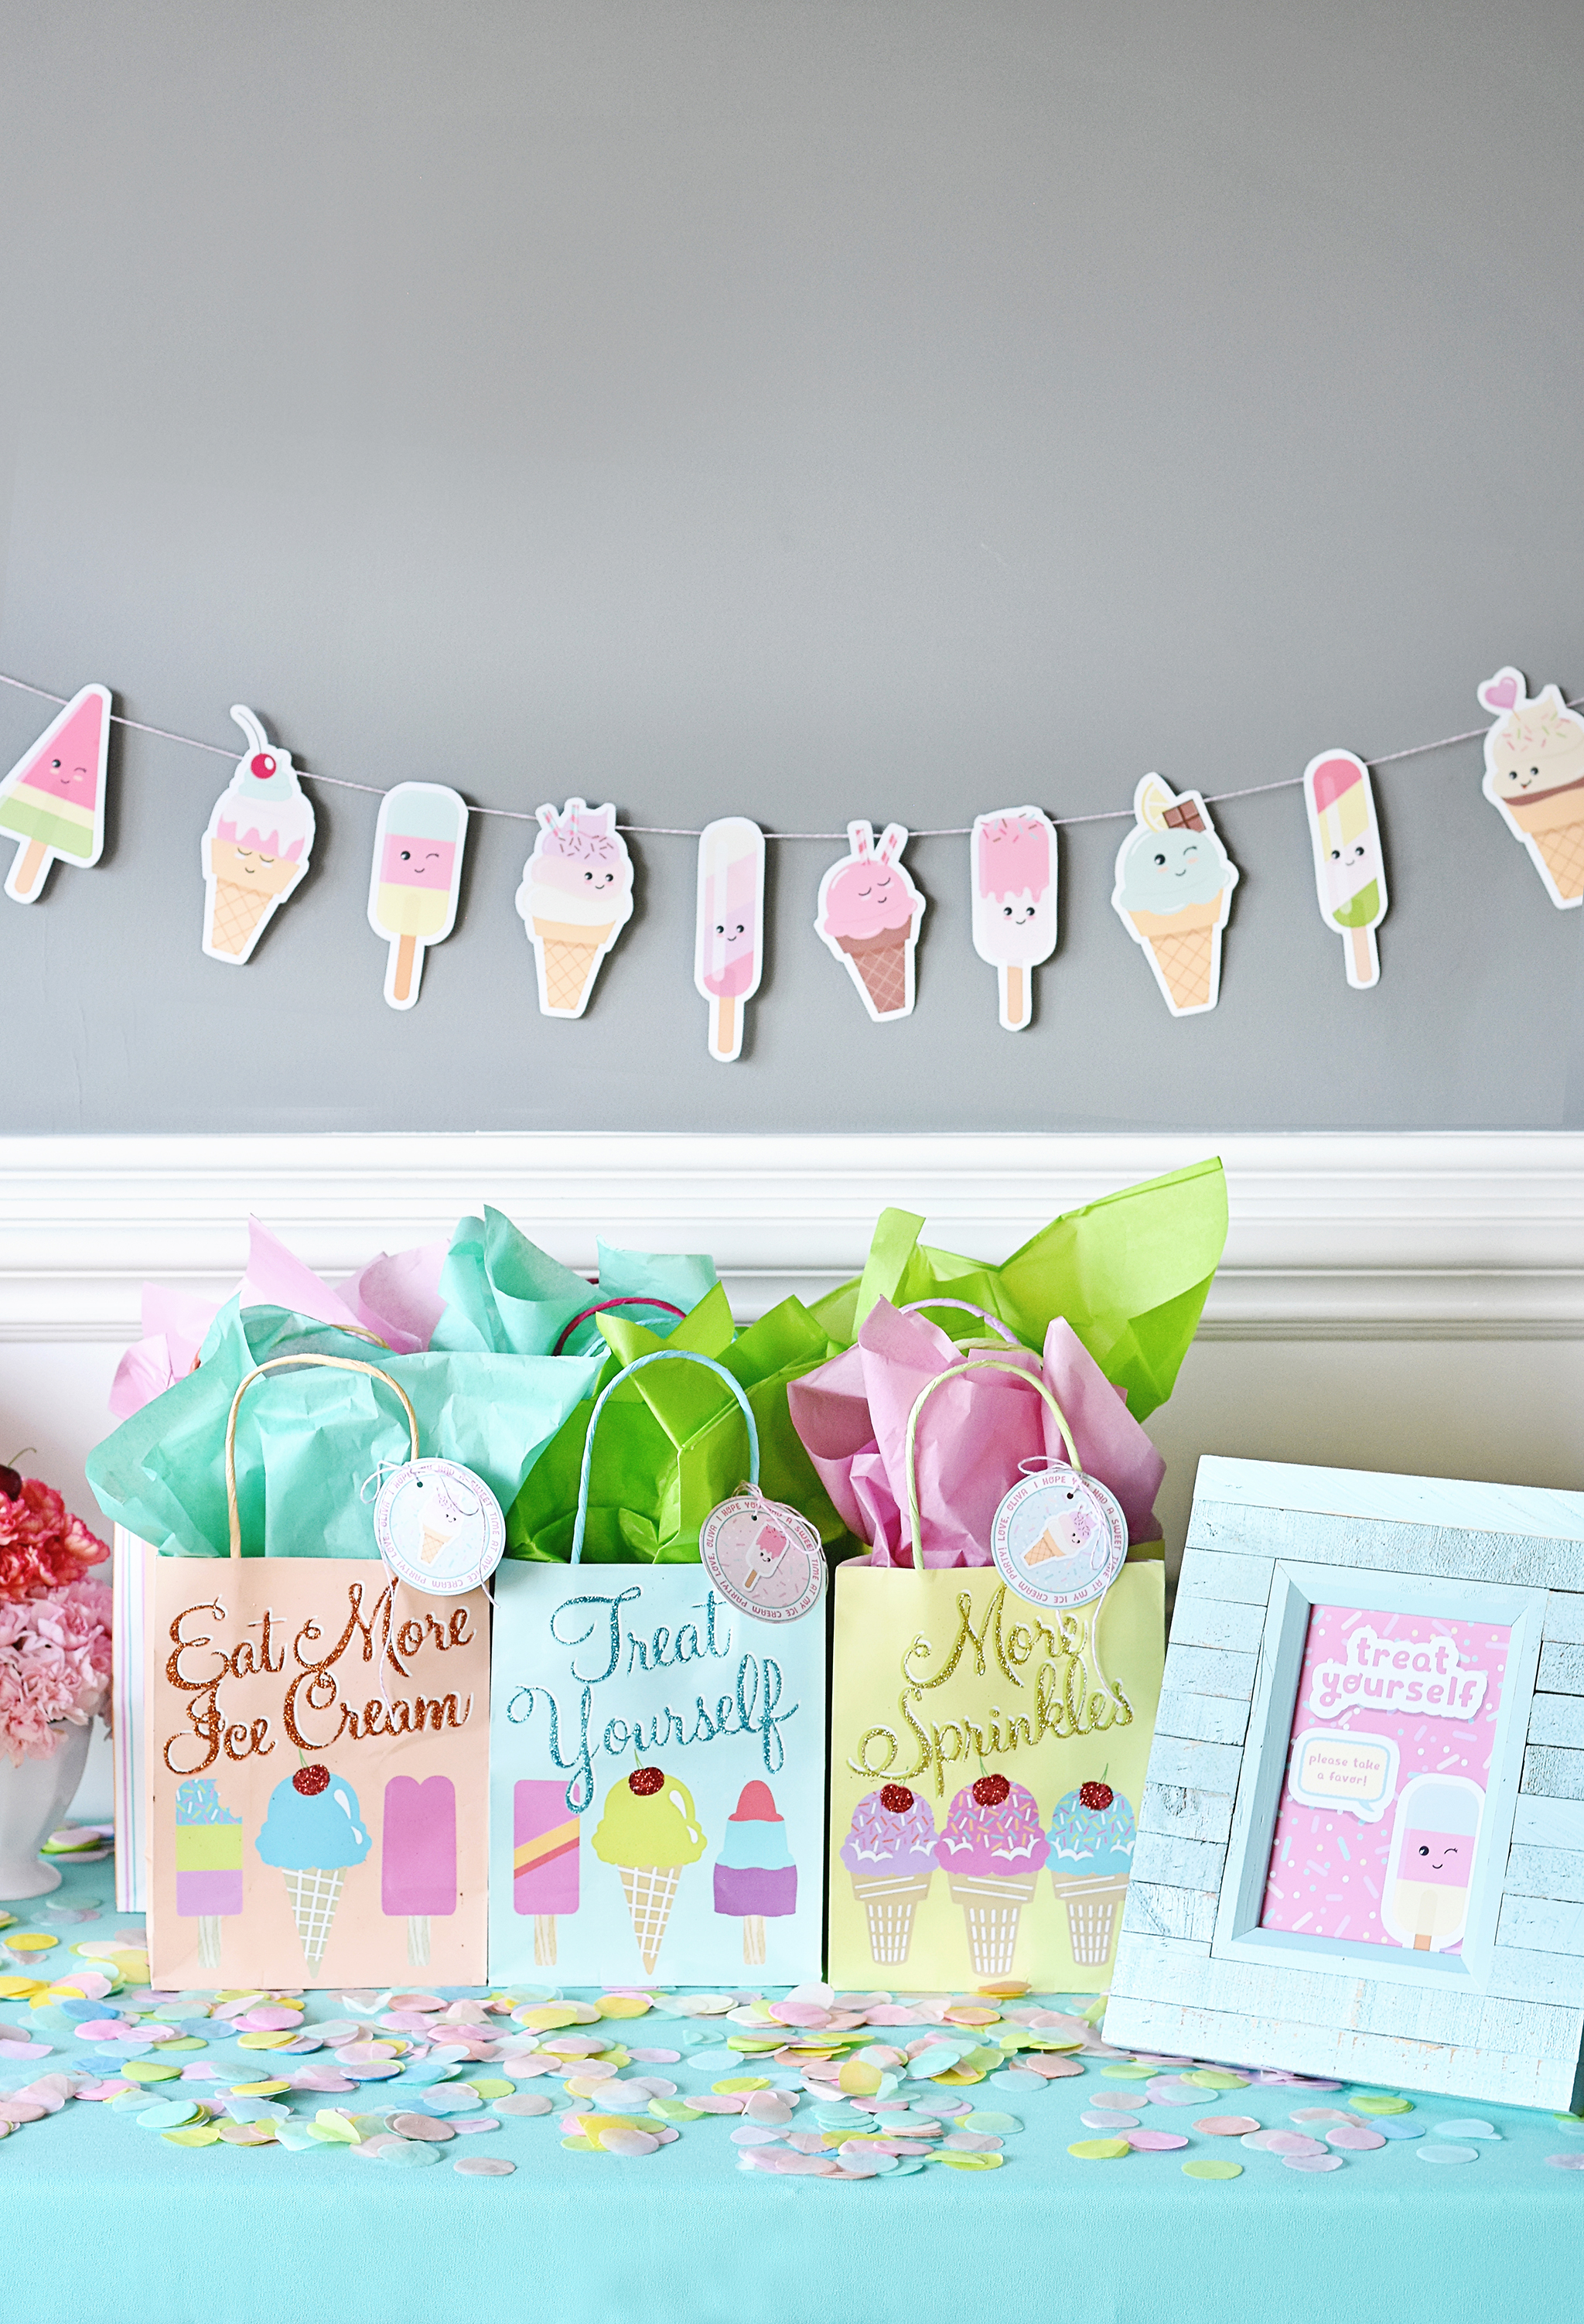 Treat Yourself at the Ice Cream Goody Bag Favor Table